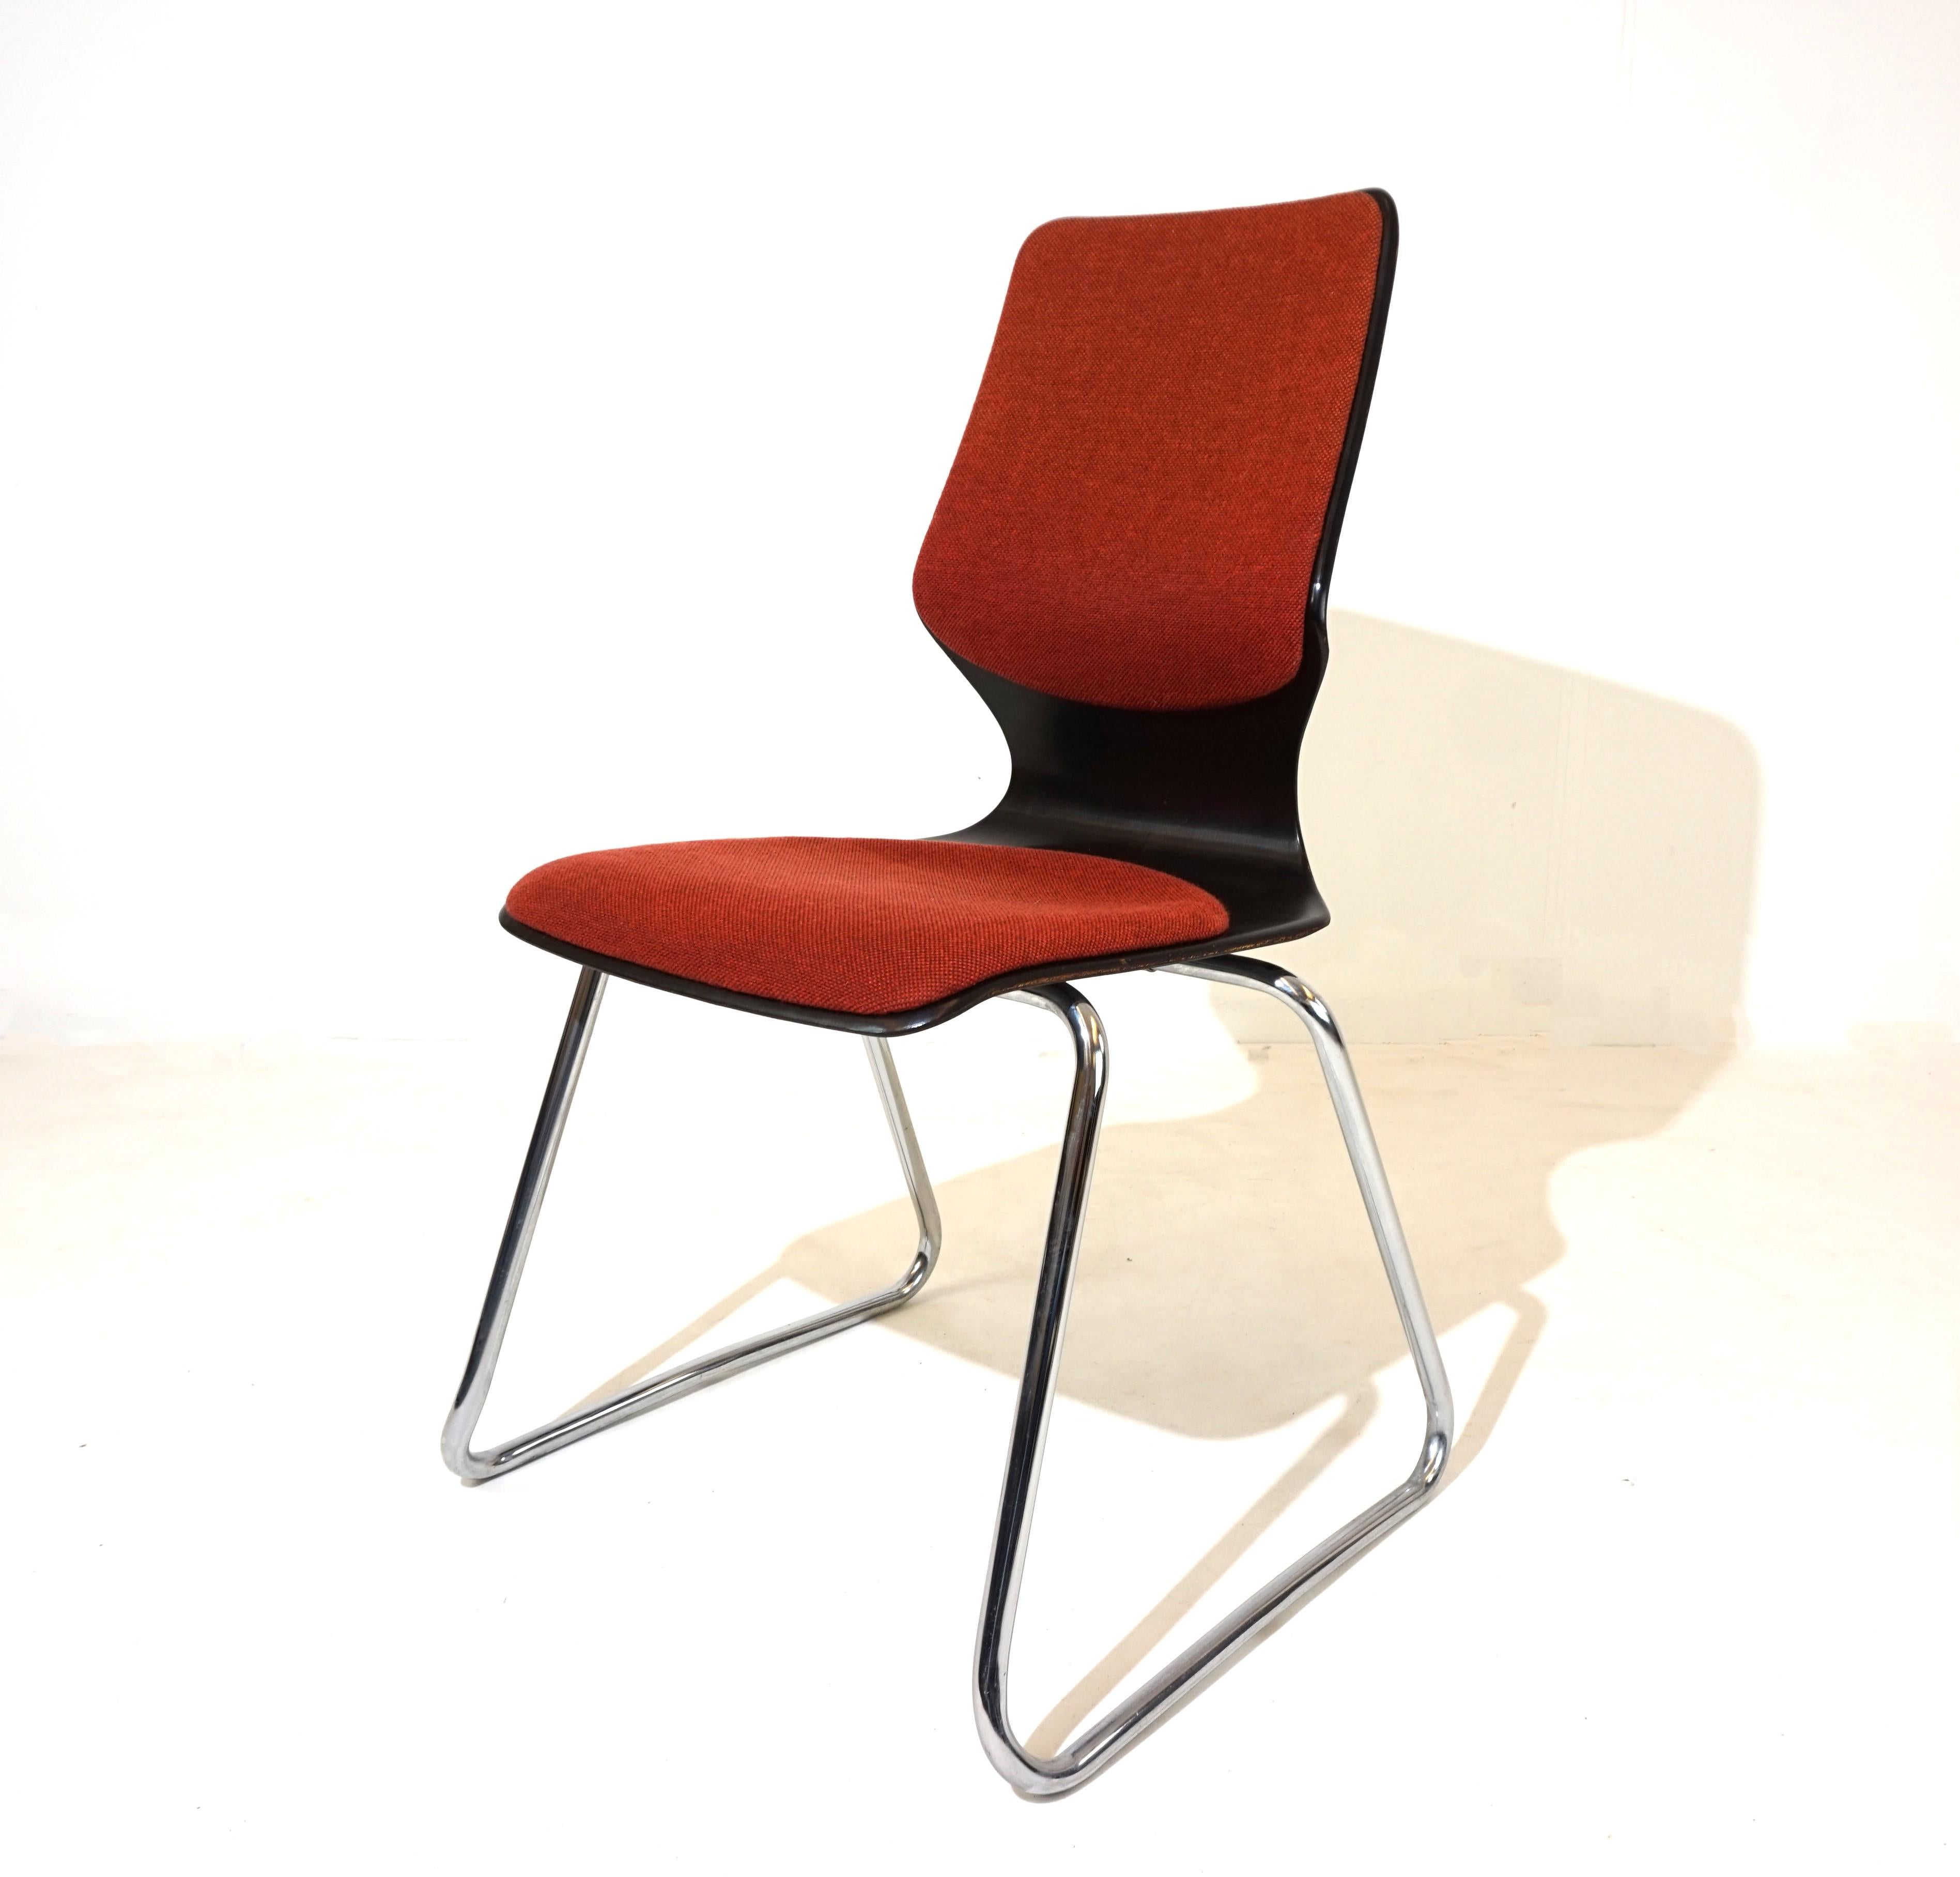 Flötotto set of 4 Pagholz chairs by Elmar Flötotto For Sale 11